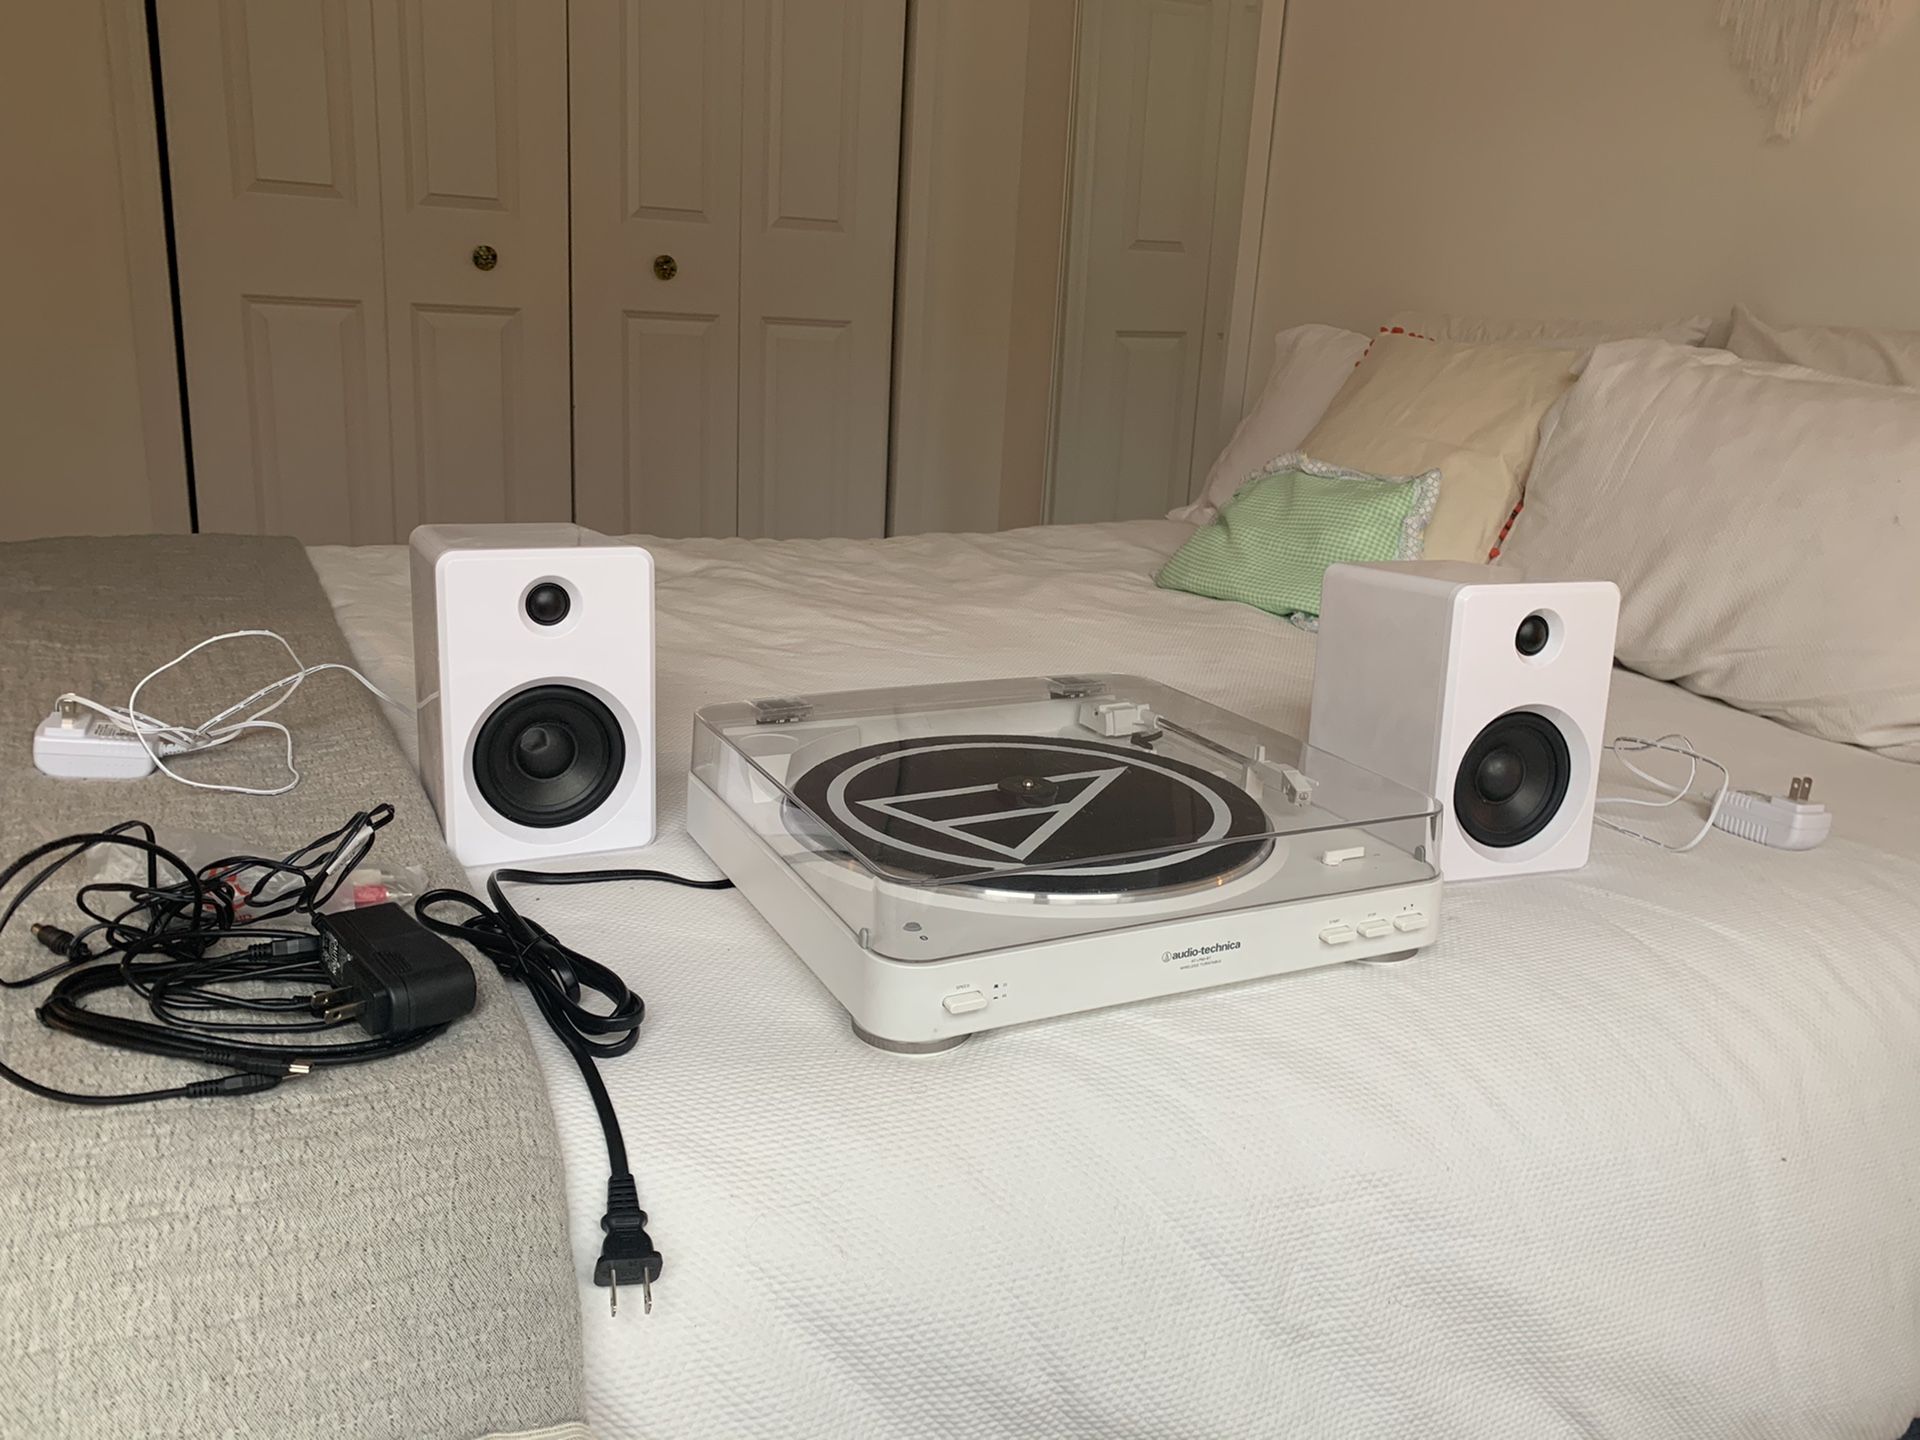 Audio technica record player and speakers